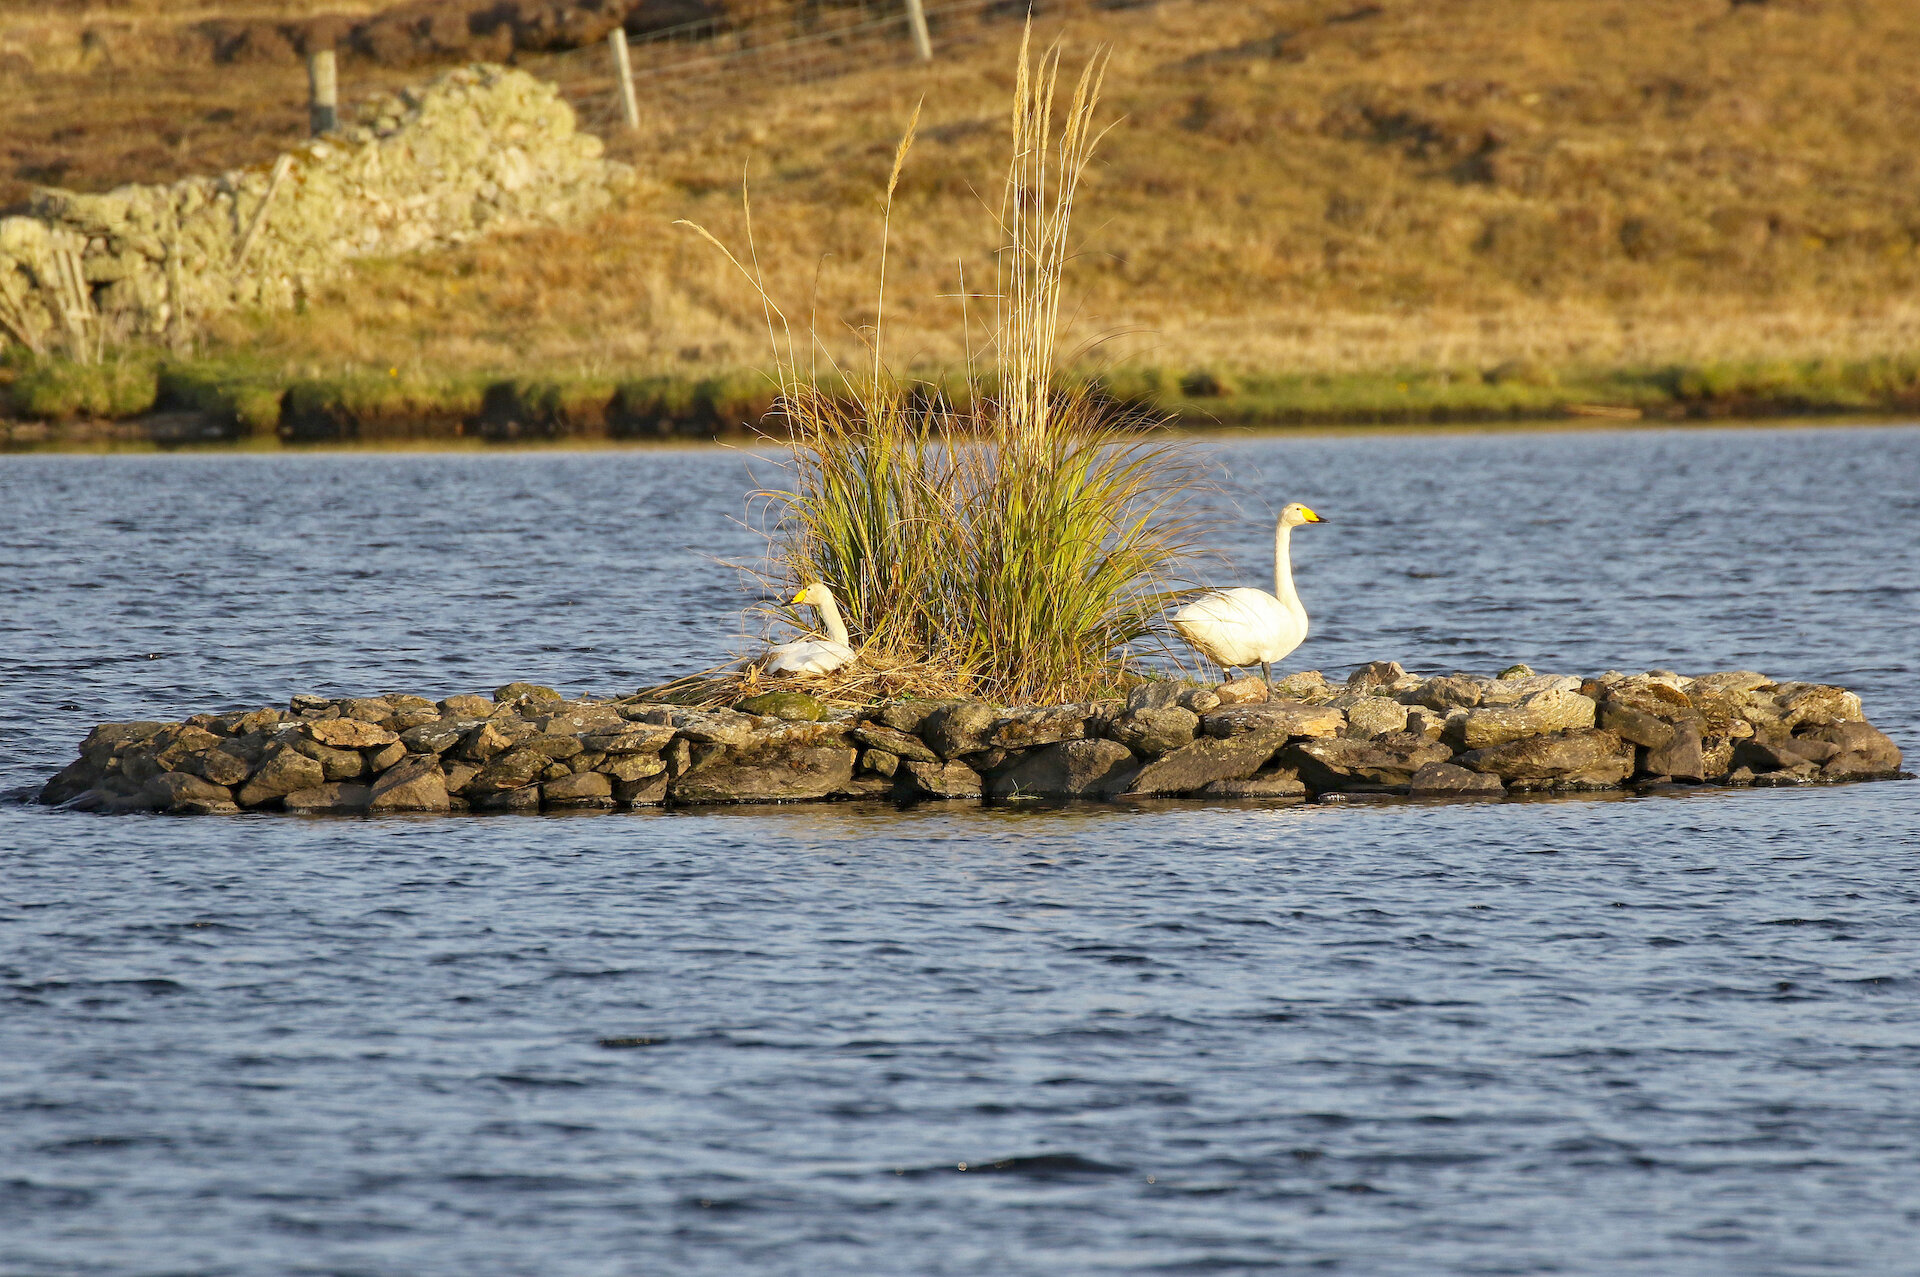 Whooper swans on the nest at Vatshoull Loch in Whalsay